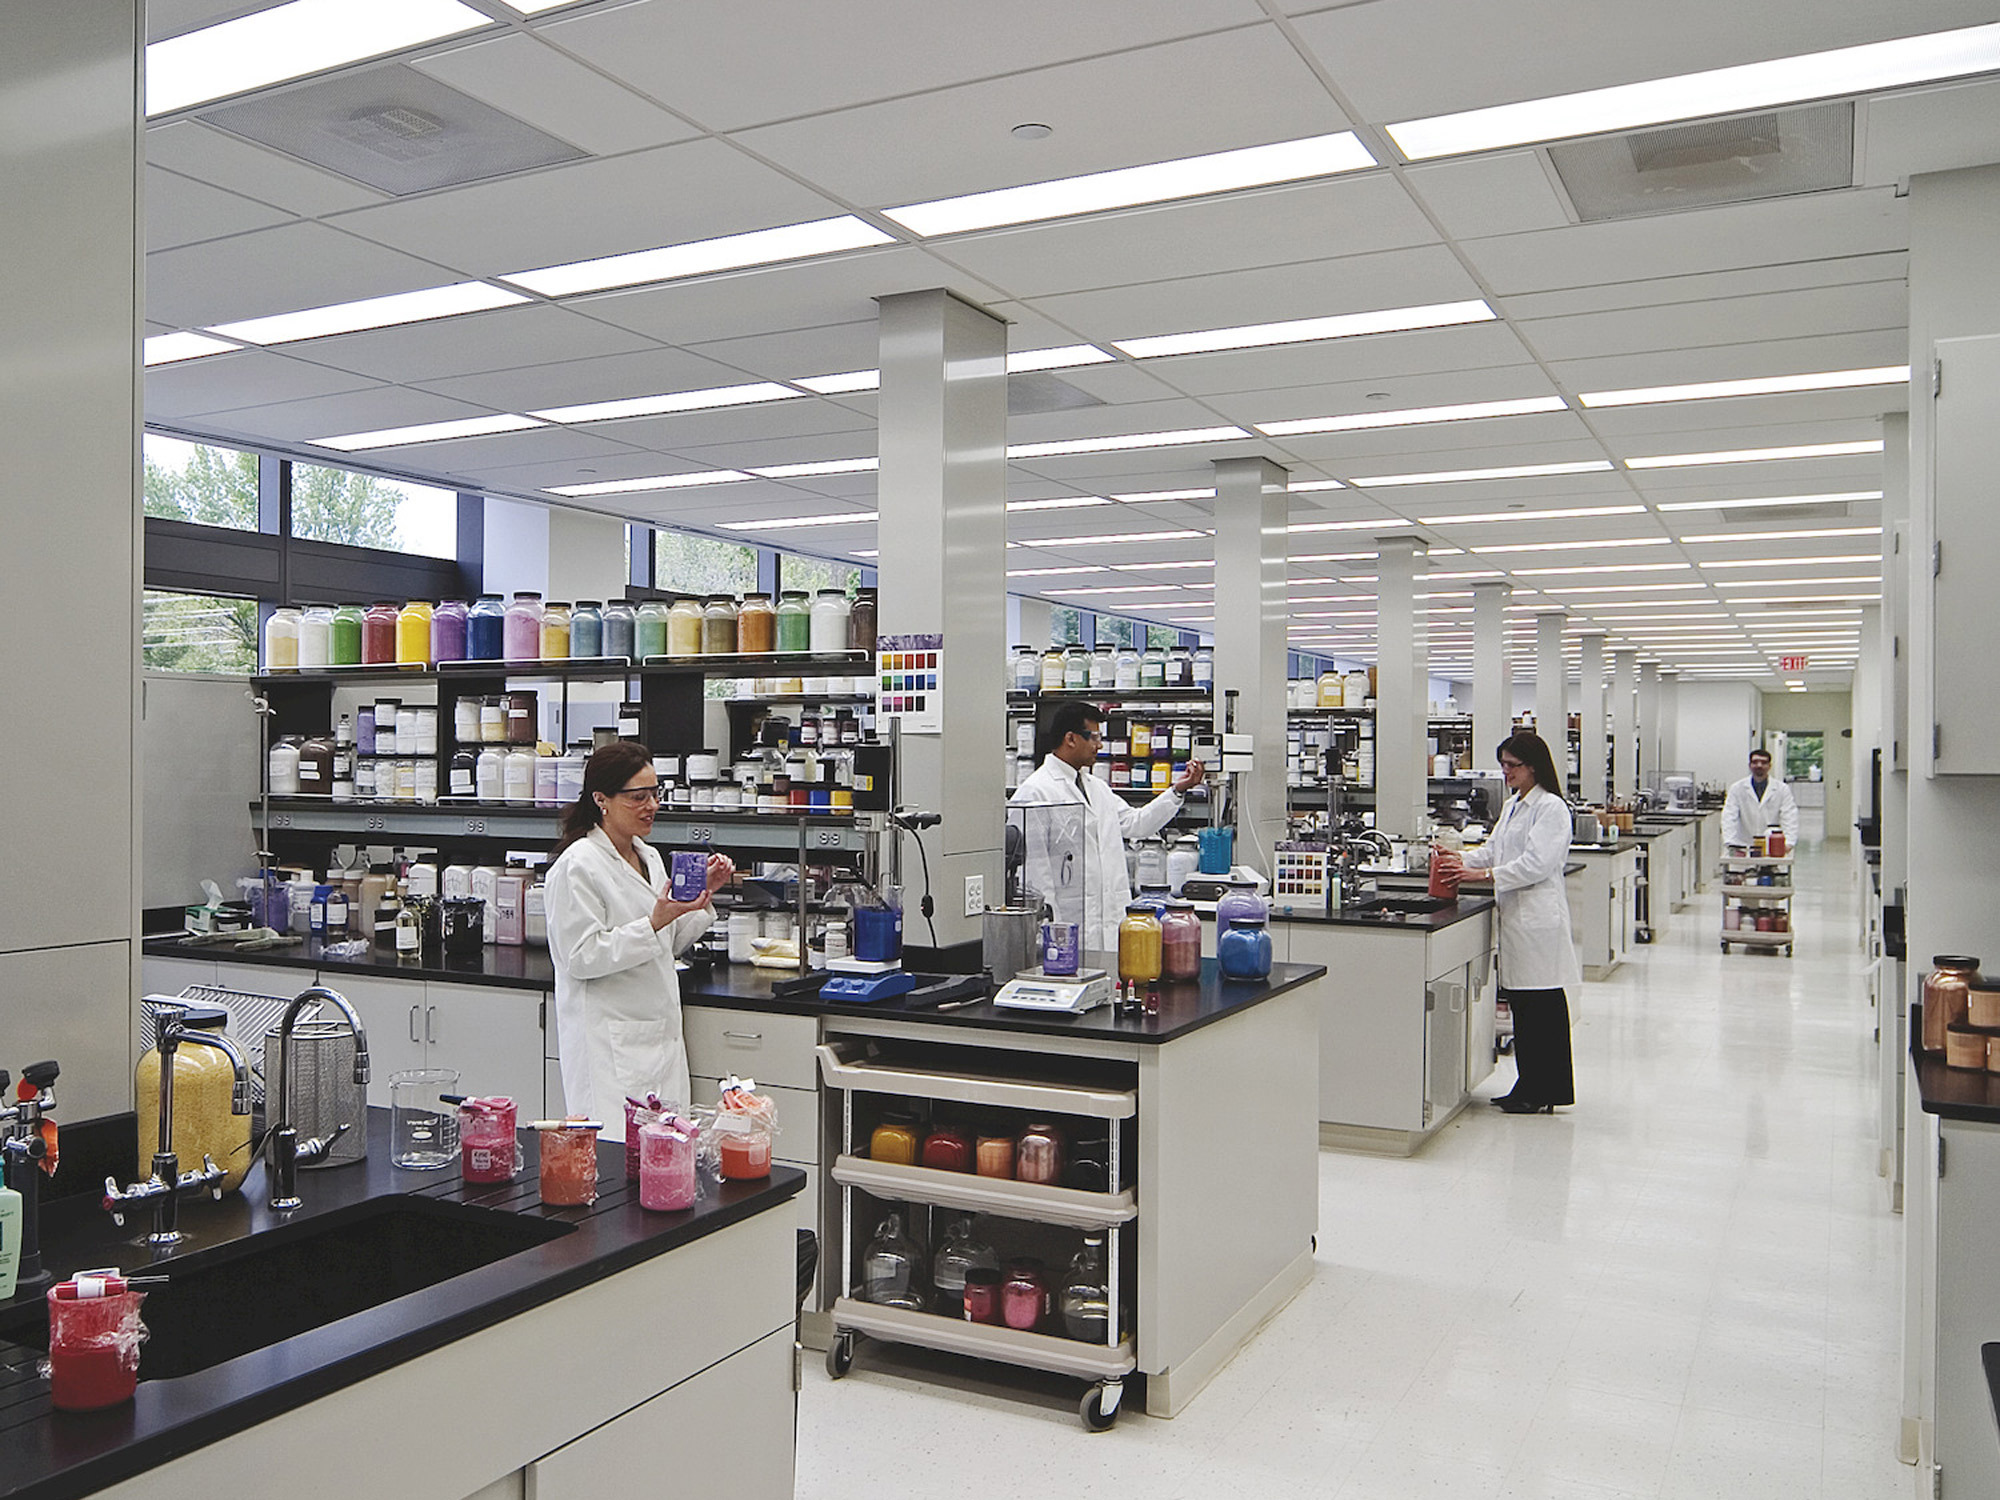 Spacious laboratory interior with streamlined white countertops; equipped with scientific apparatus, glassware, and labeled material containers. Scientists in lab coats engaged in research activities, enhancing the space's functional design highlighting cleanliness and organization for efficient workflow.